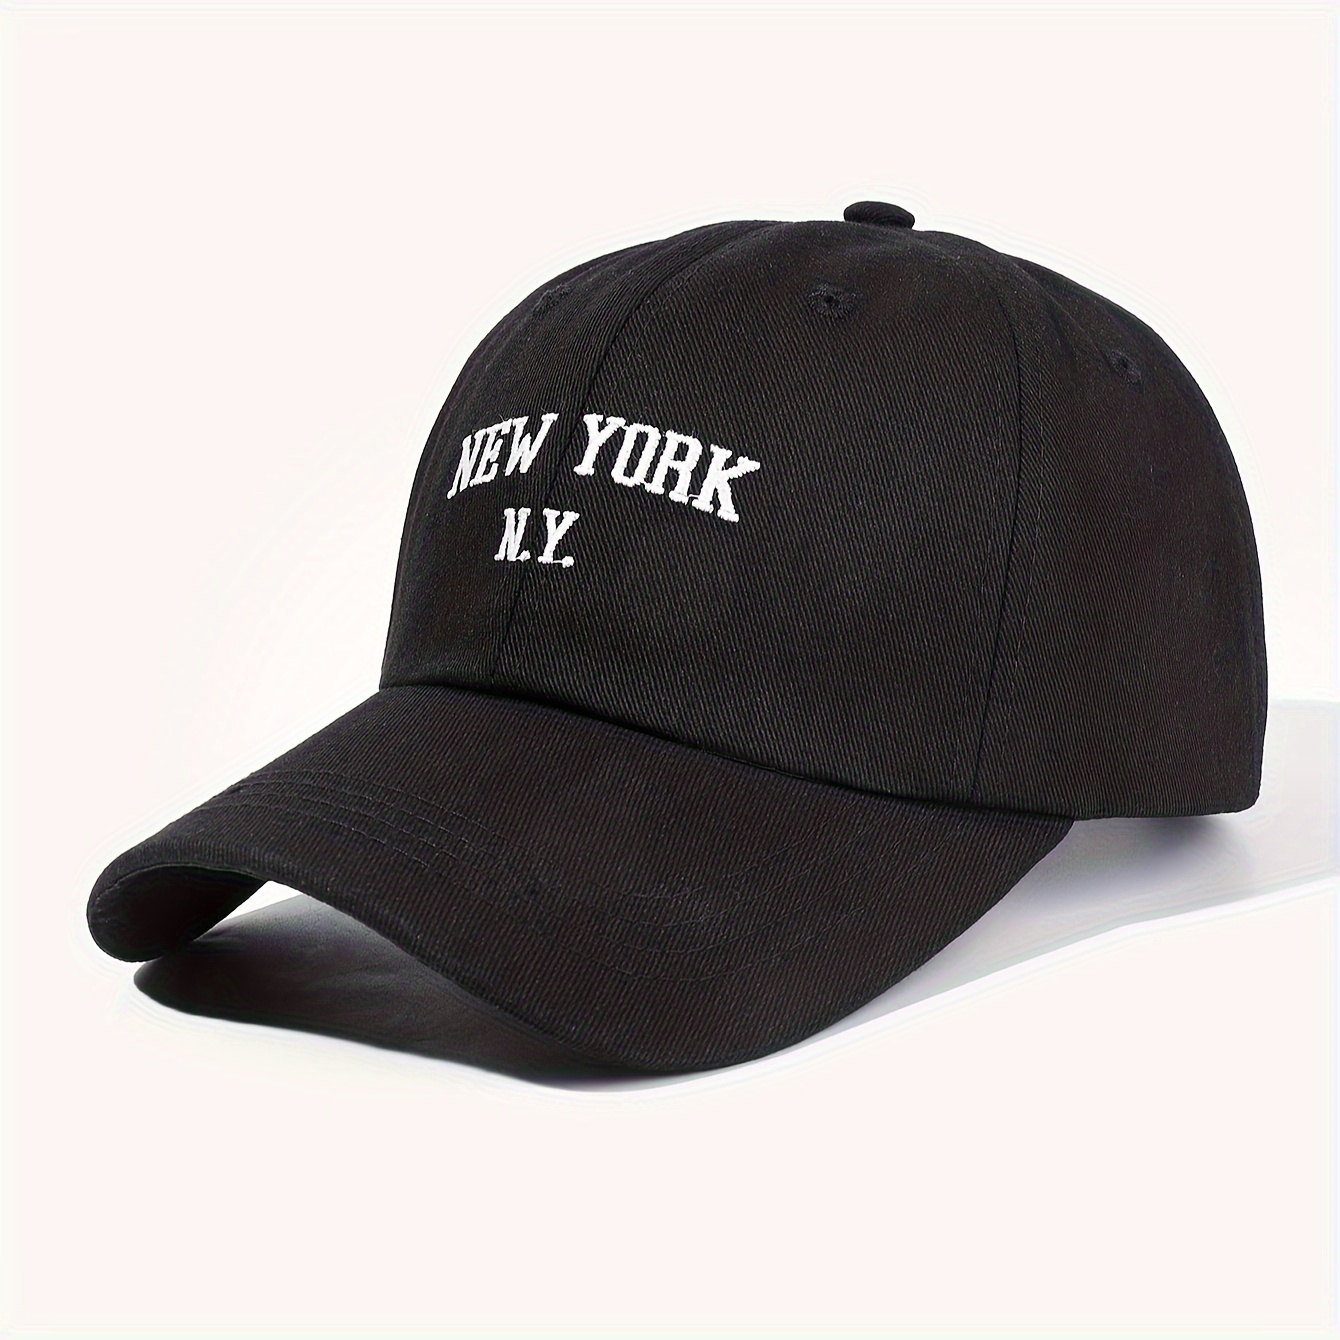 

1pc Embroidered Baseball Cap, New York N.y., Suitable For Outdoor Leisure Vacation